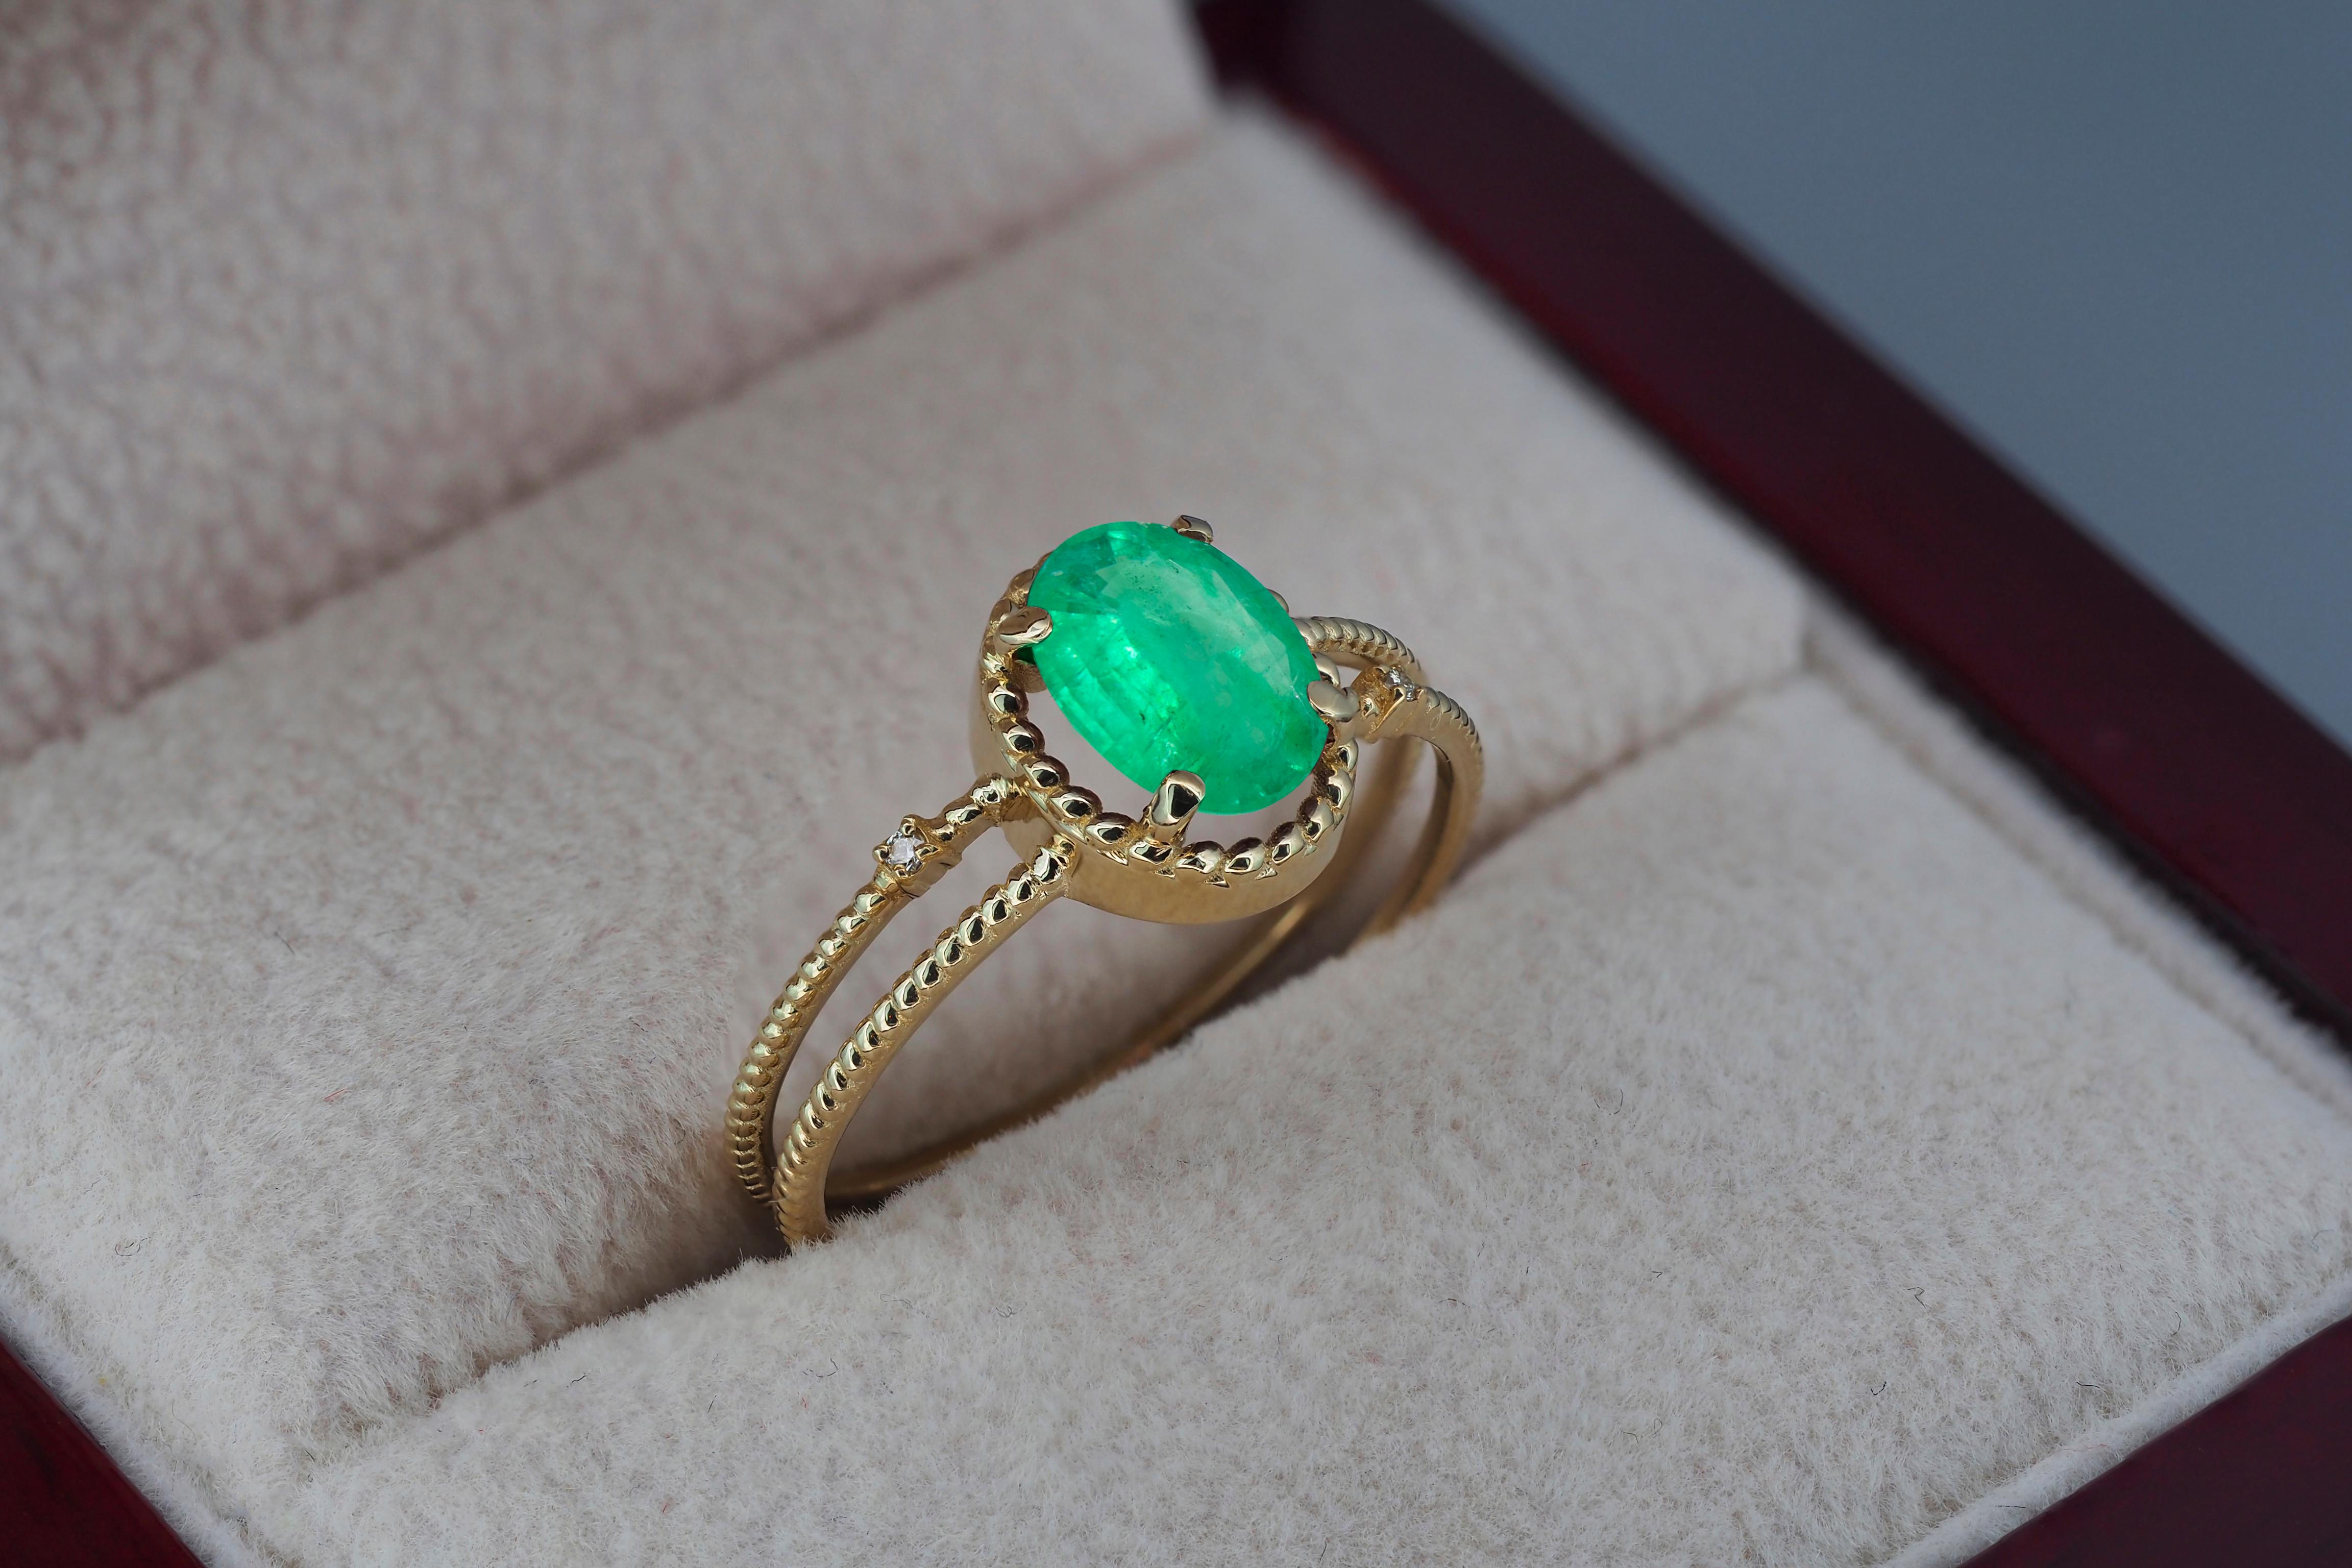 Women's Emerald Gold Ring. Oval Emerald Ring. 14k Gold Ring with Emerald For Sale